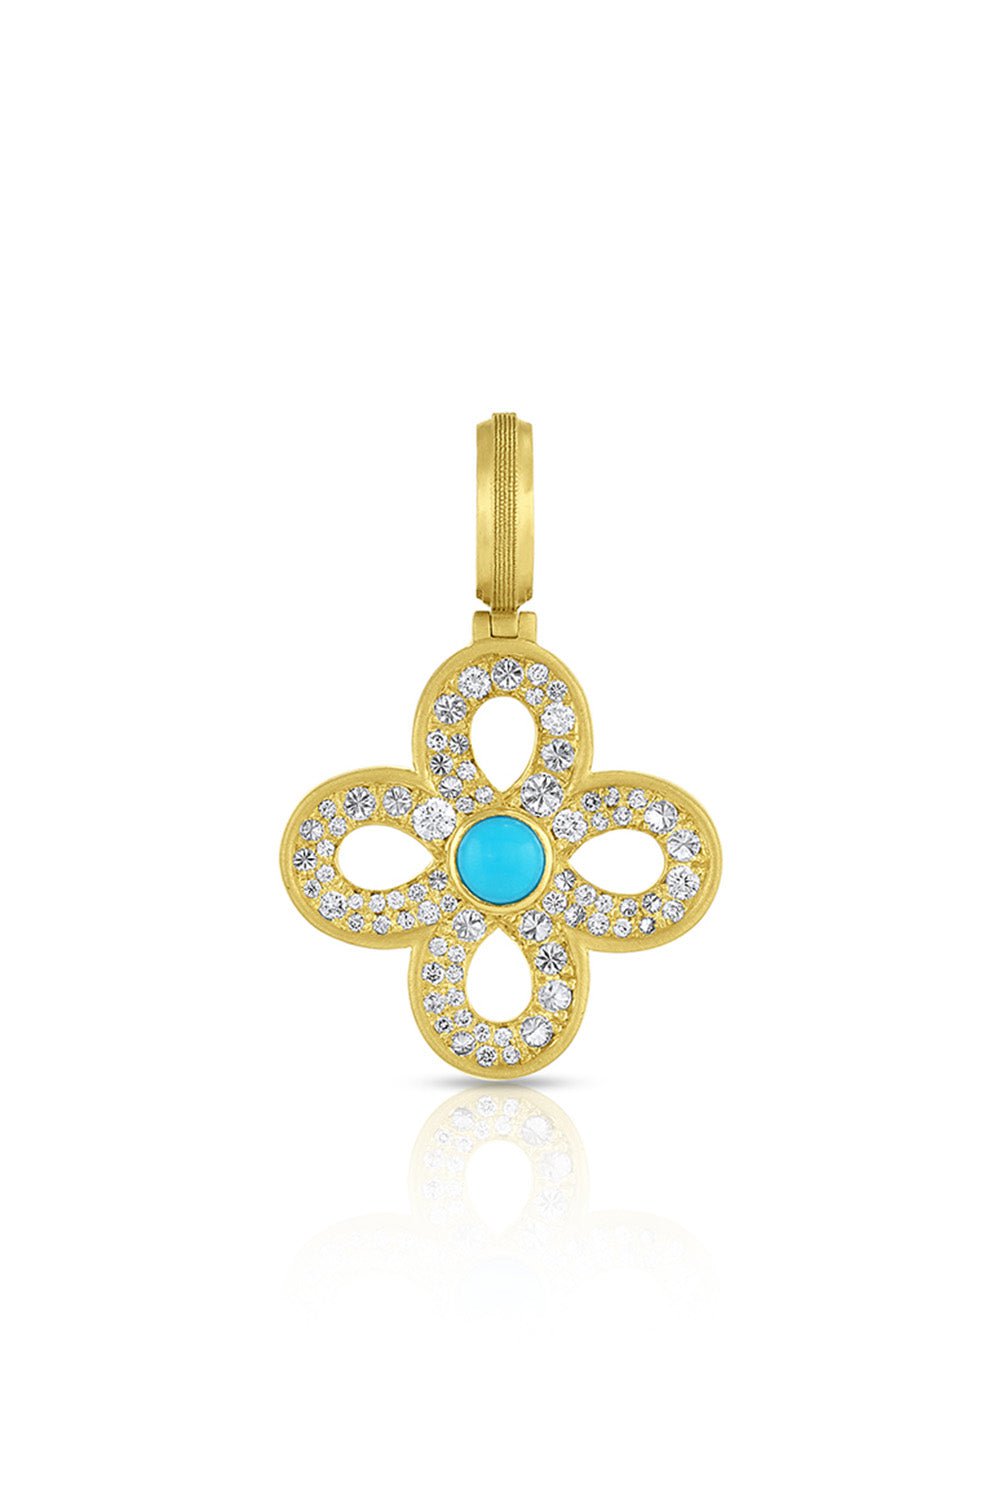 LEIGH MAXWELL-Four Leaf Clover Pendant-YELLOW GOLD